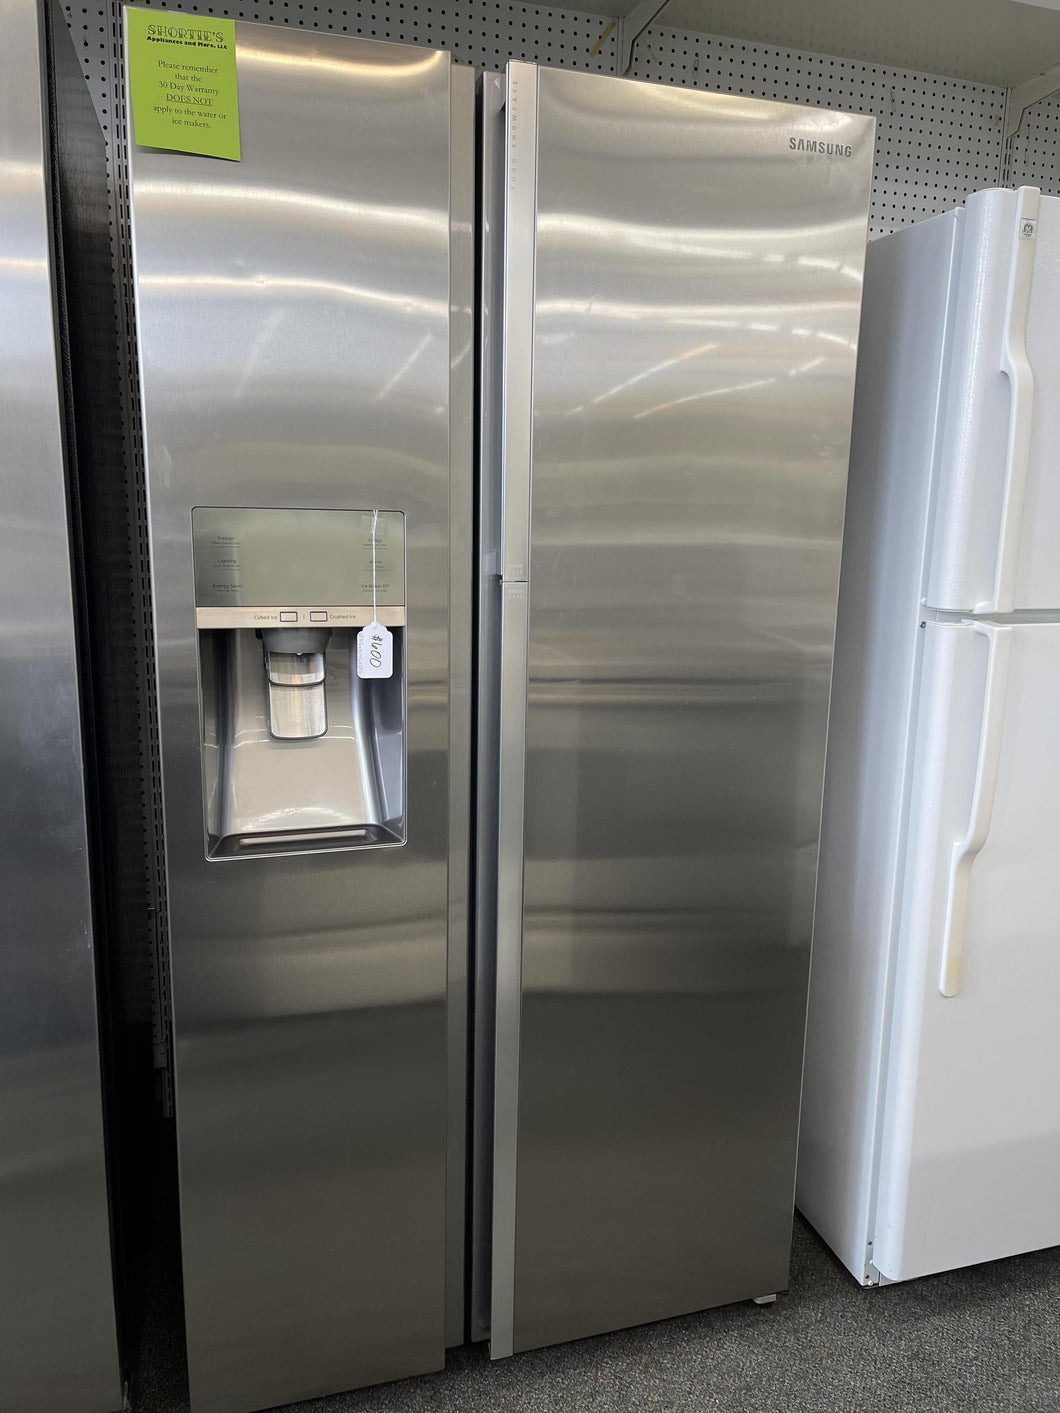 Samsung Stainless Side by Side Refrigerator - 2563